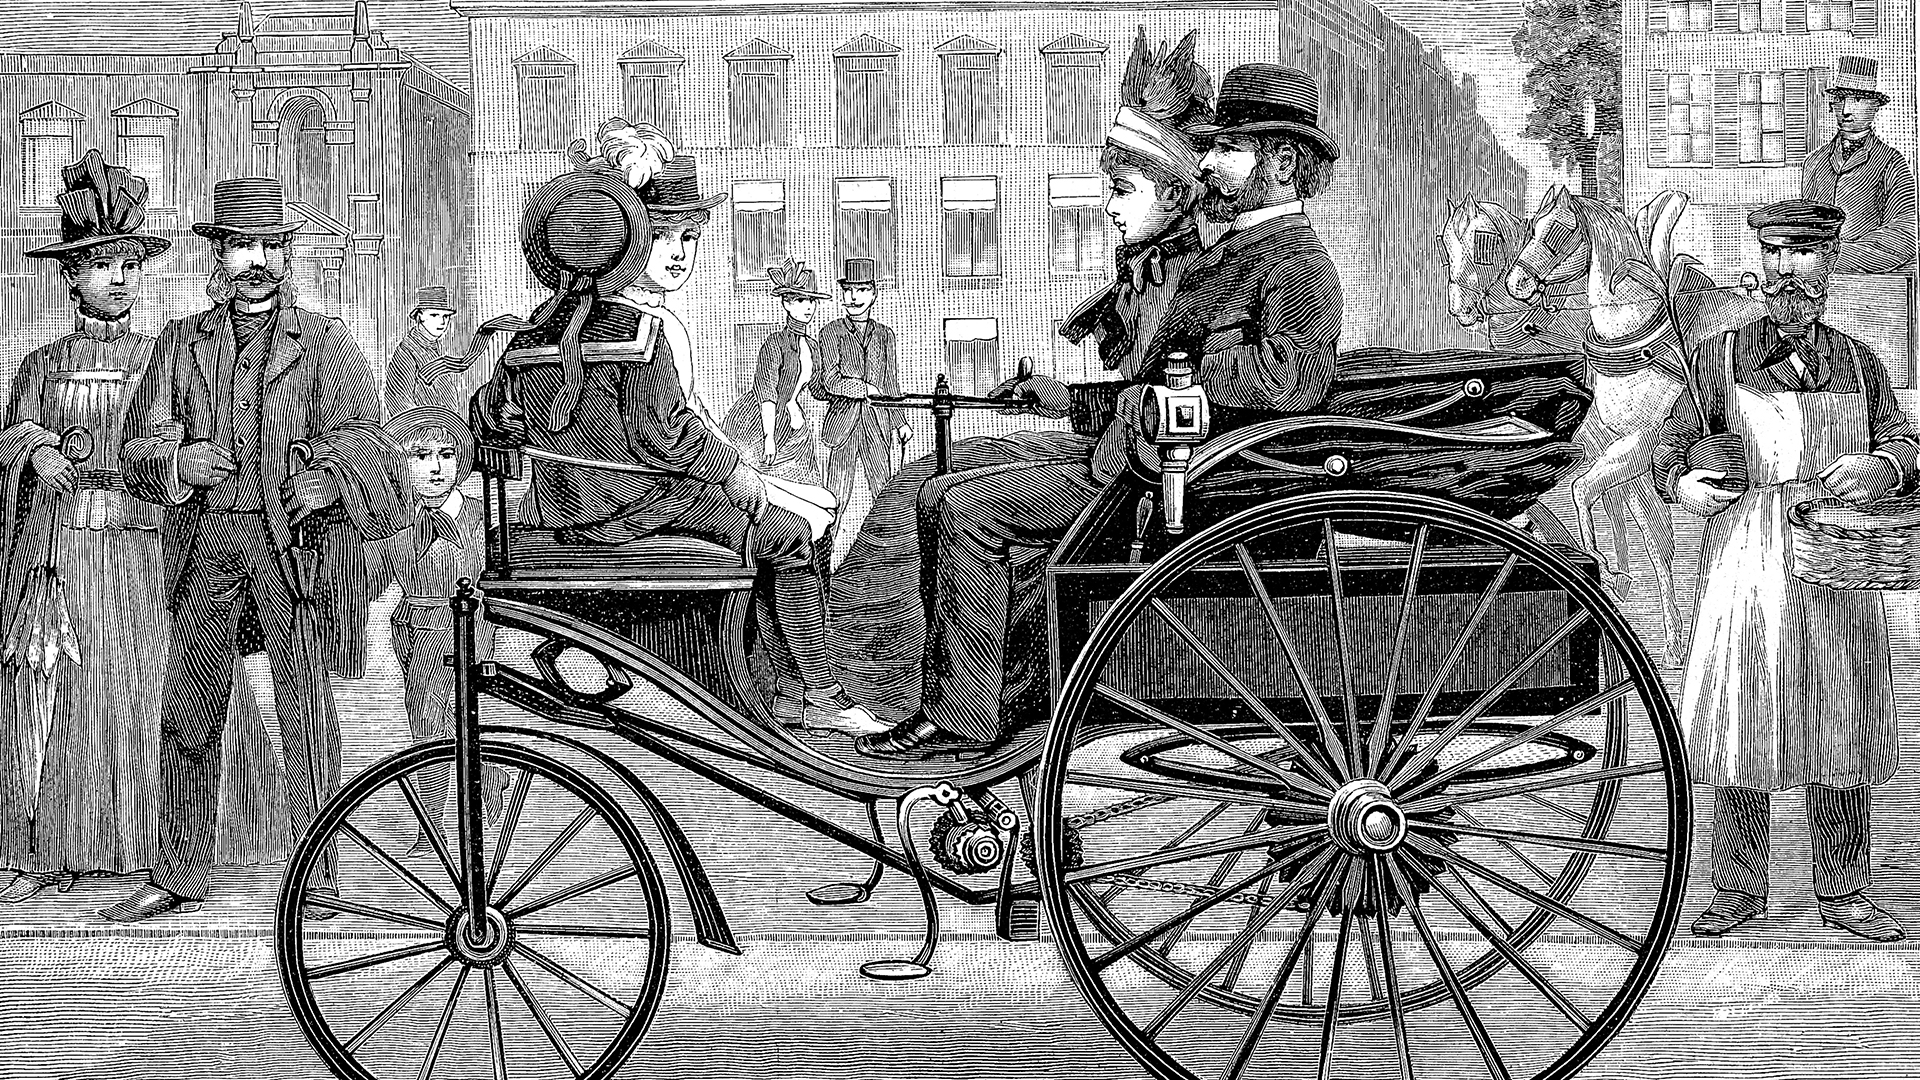 August 5, 1888: Bertha Benz Took the First Documented Road Trip in an Automobile